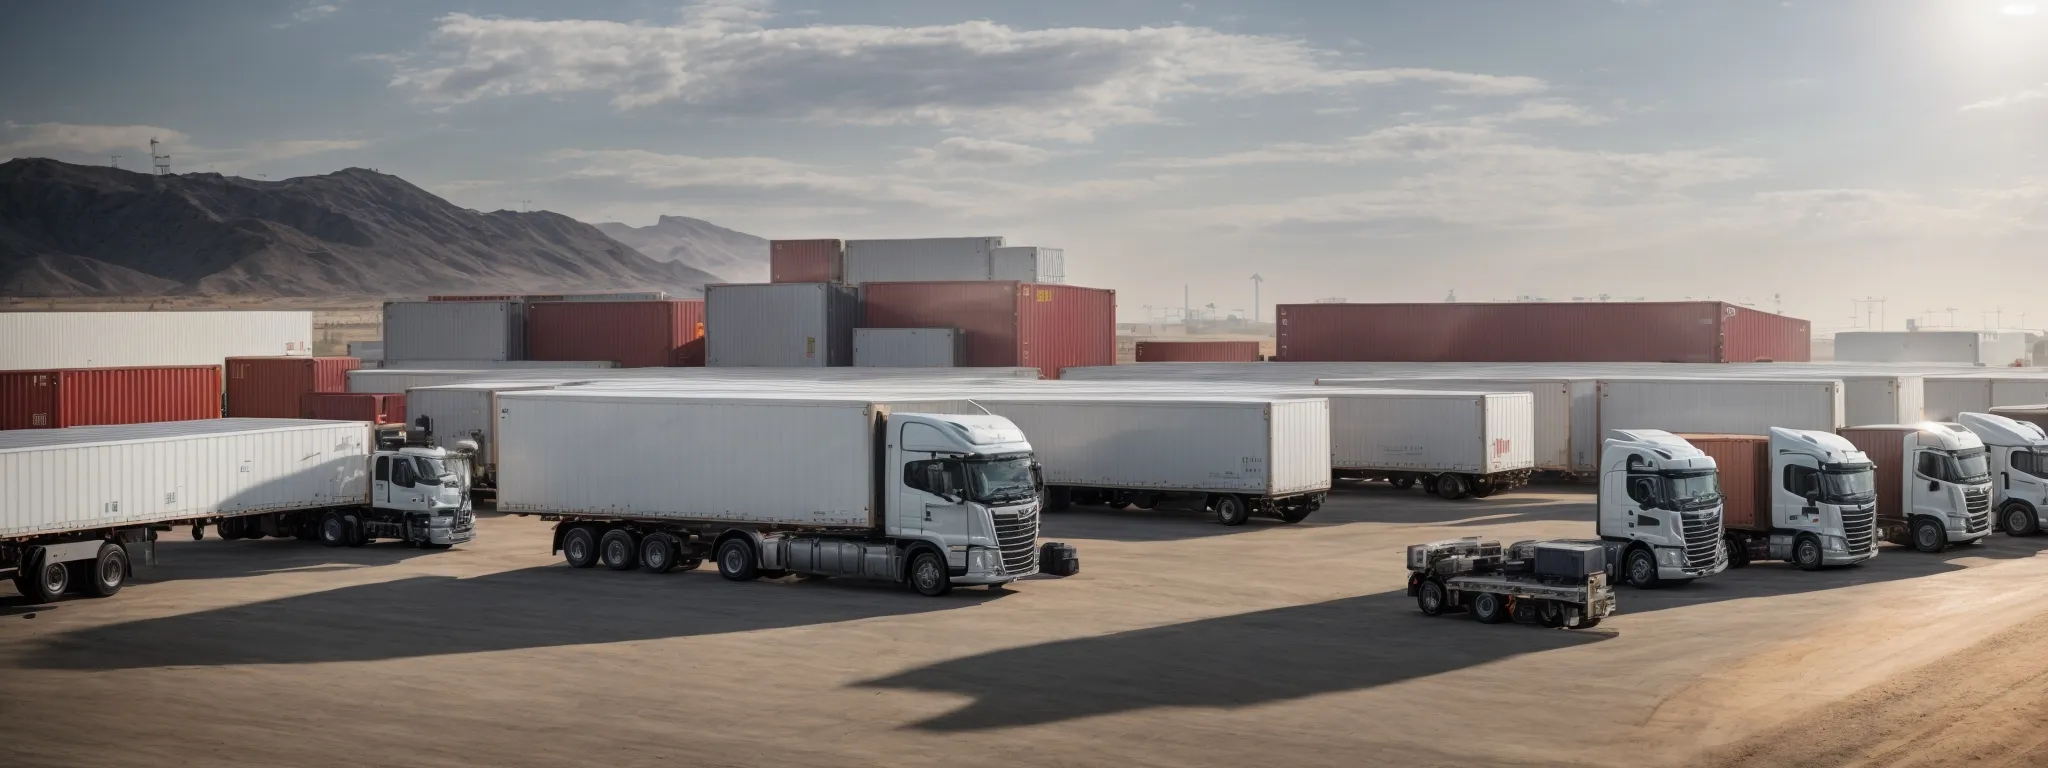 trucks at a logistics hub powered by alternative energy with solar panels in the background.